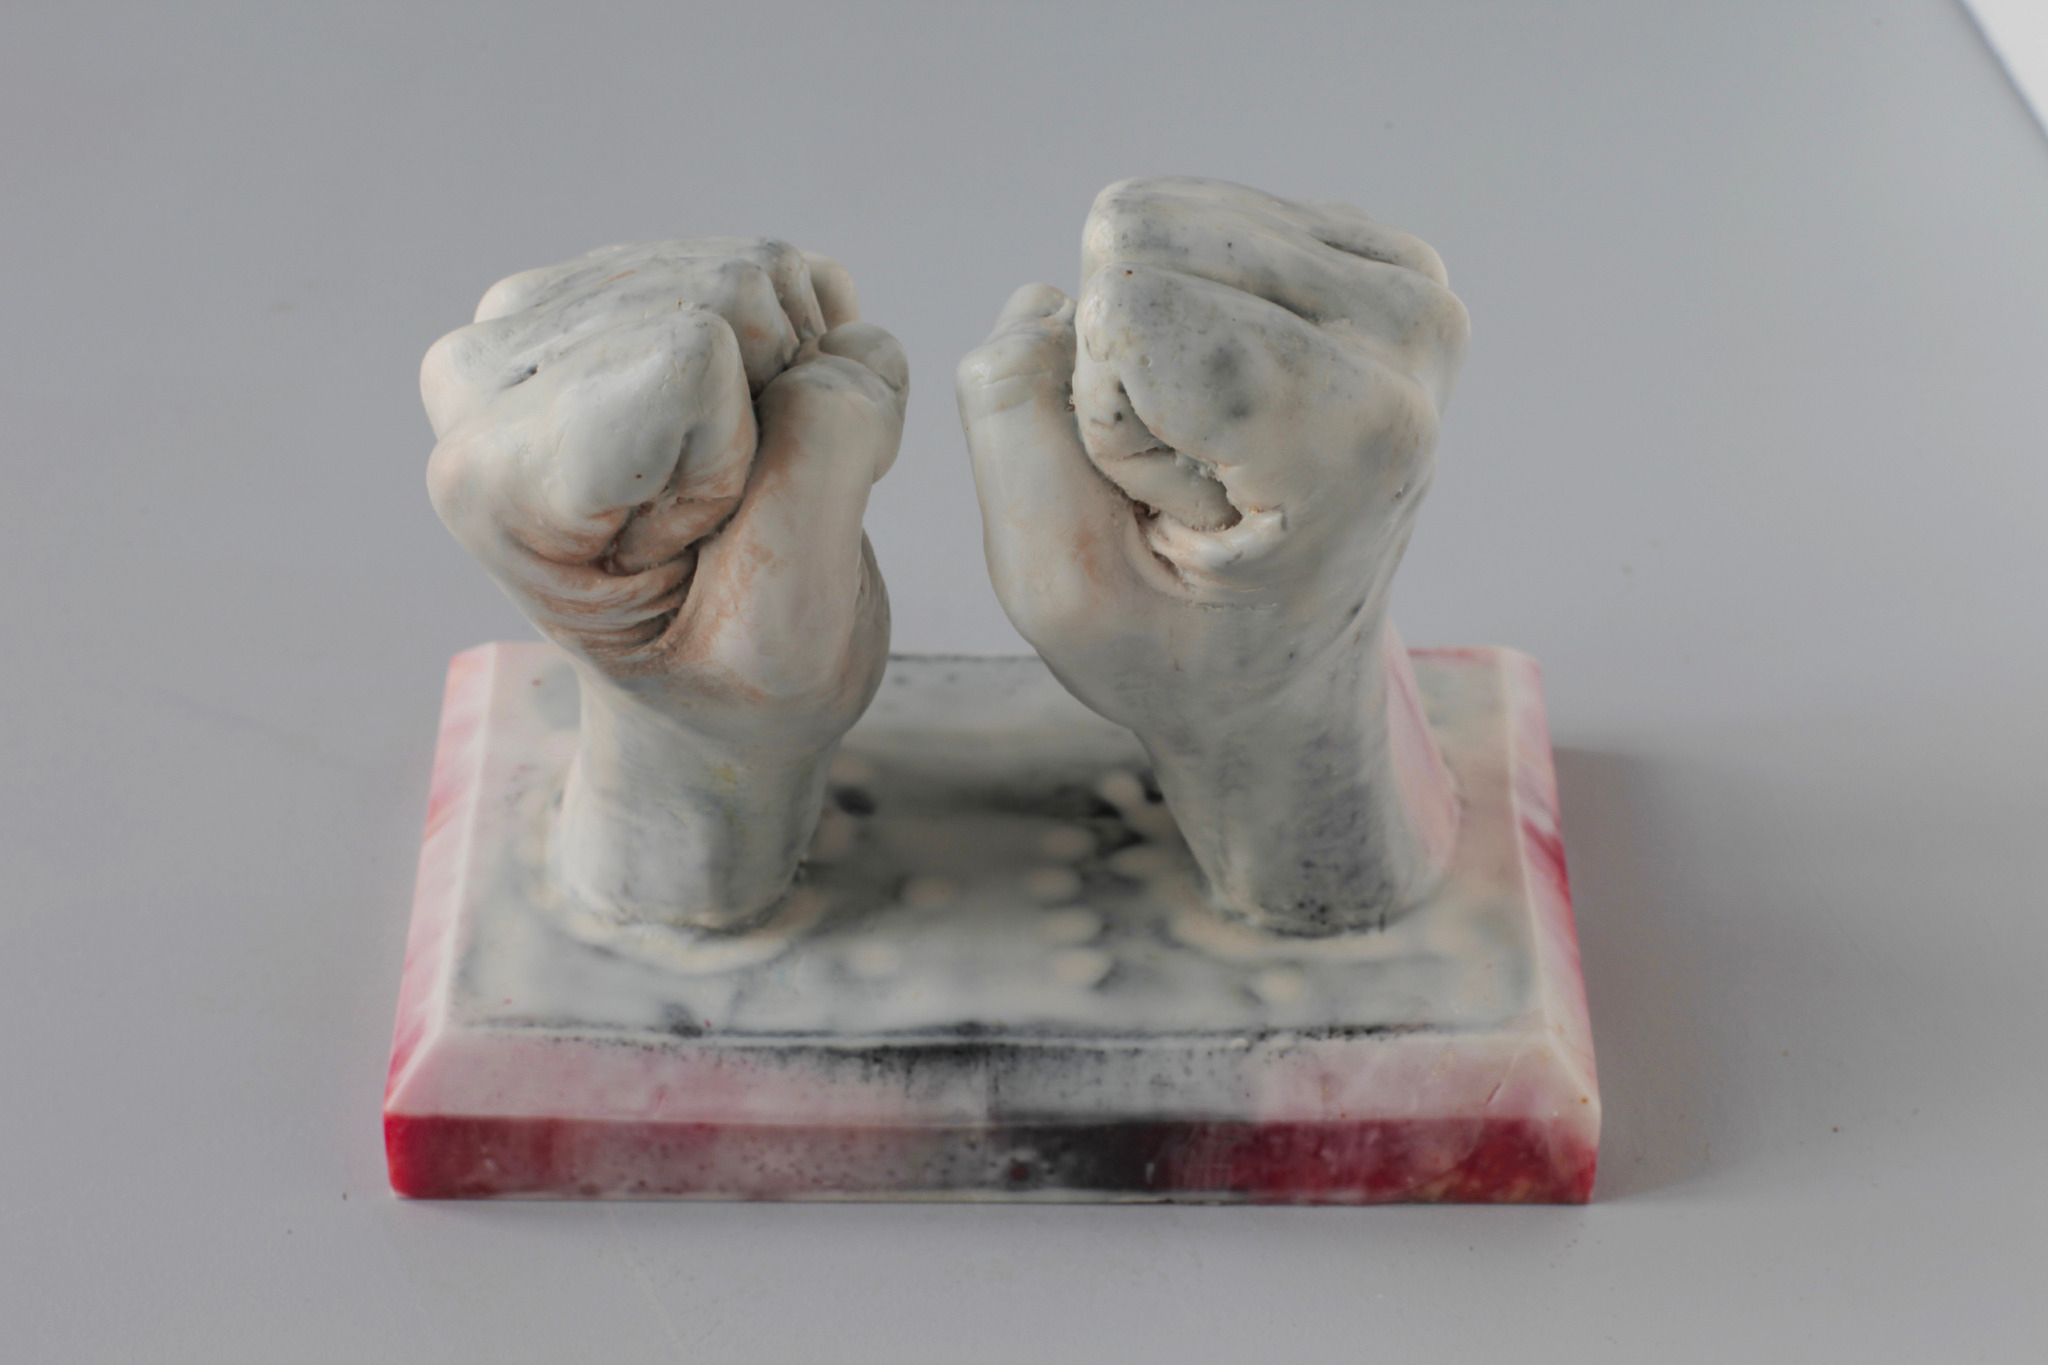 Sculpture of two fists in white